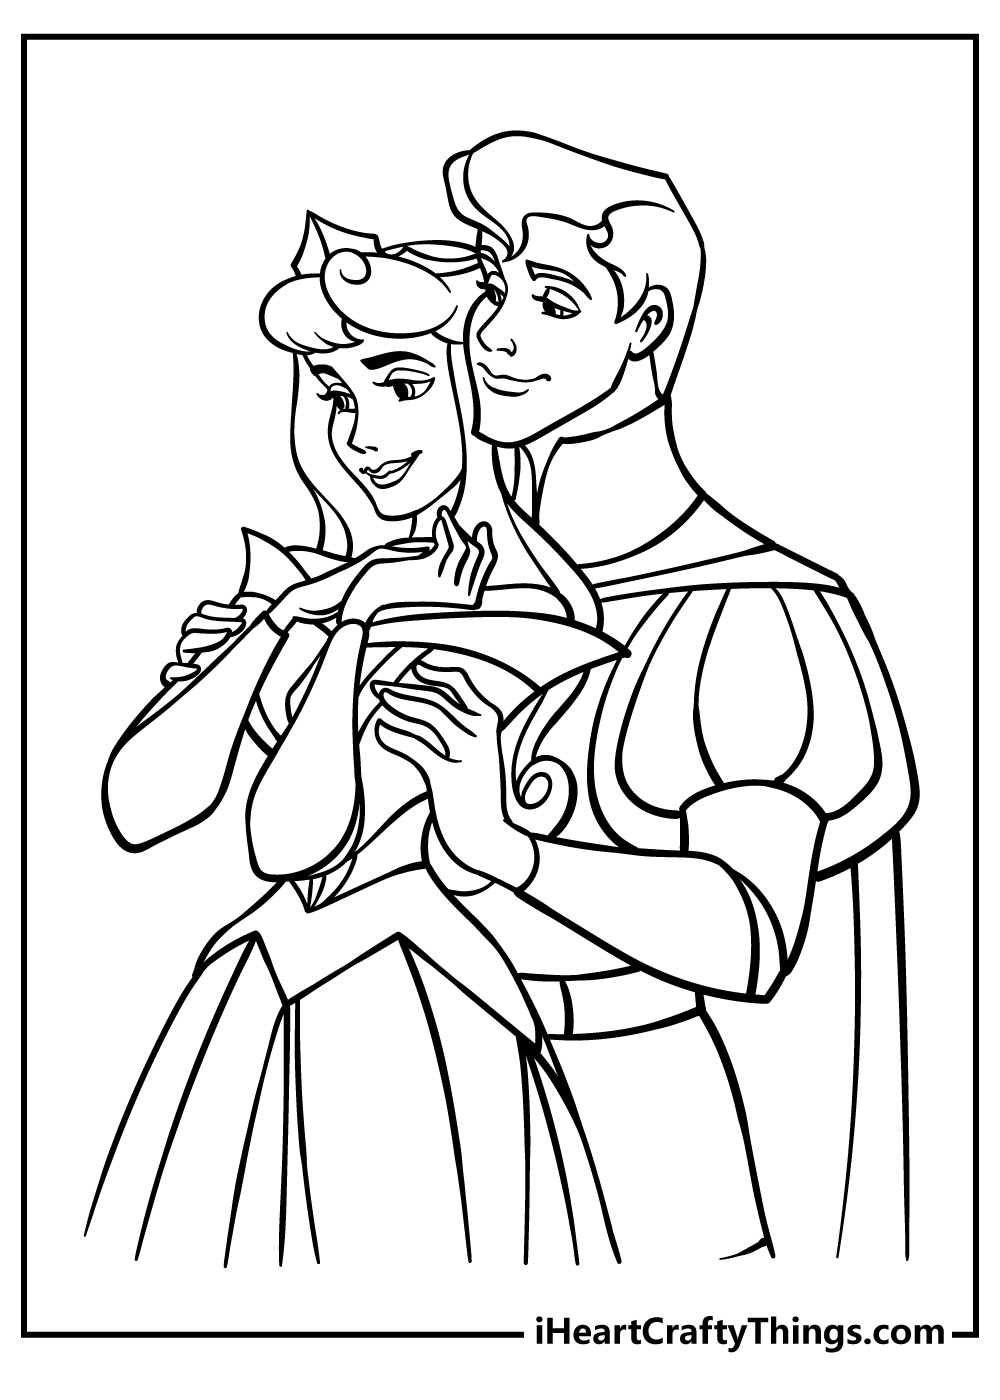 Sleeping Beauty Coloring Sheet for children free download